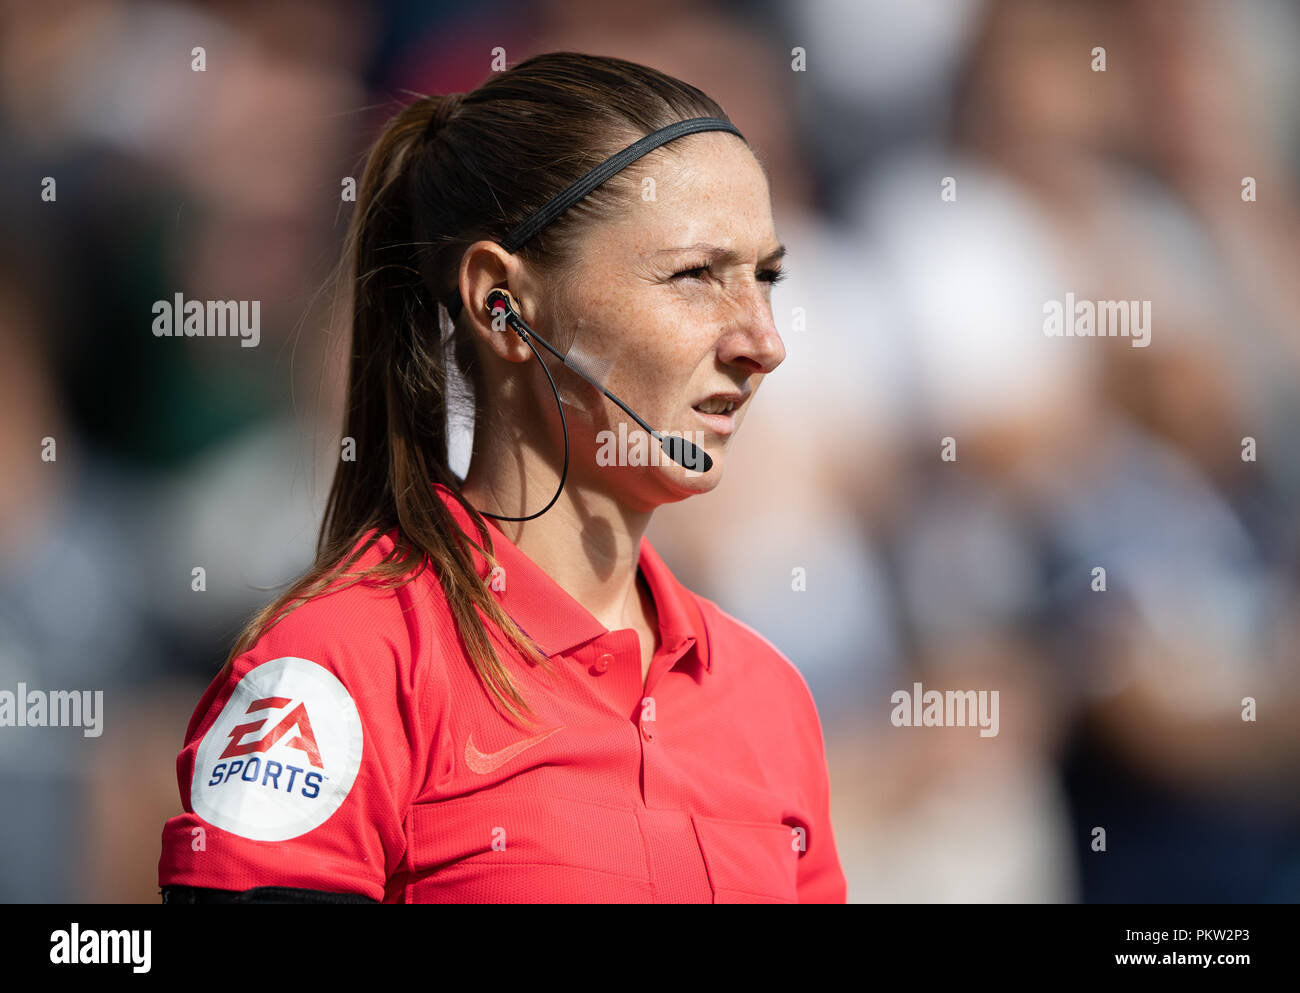 Association football referee Sian Massey-Ellis during the Sky Bet Championship match at The New Den, London. PRESS ASSOCIATION Photo. Picture date: Saturday September 15, 2018. See PA story SOCCER Millwall. Photo credit should read: Ian Walton/PA Wire. RESTRICTIONS: No use with unauthorised audio, video, data, fixture lists, club/league logos or 'live' services. Online in-match use limited to 120 images, no video emulation. No use in betting, games or single club/league/player publications. Stock Photo